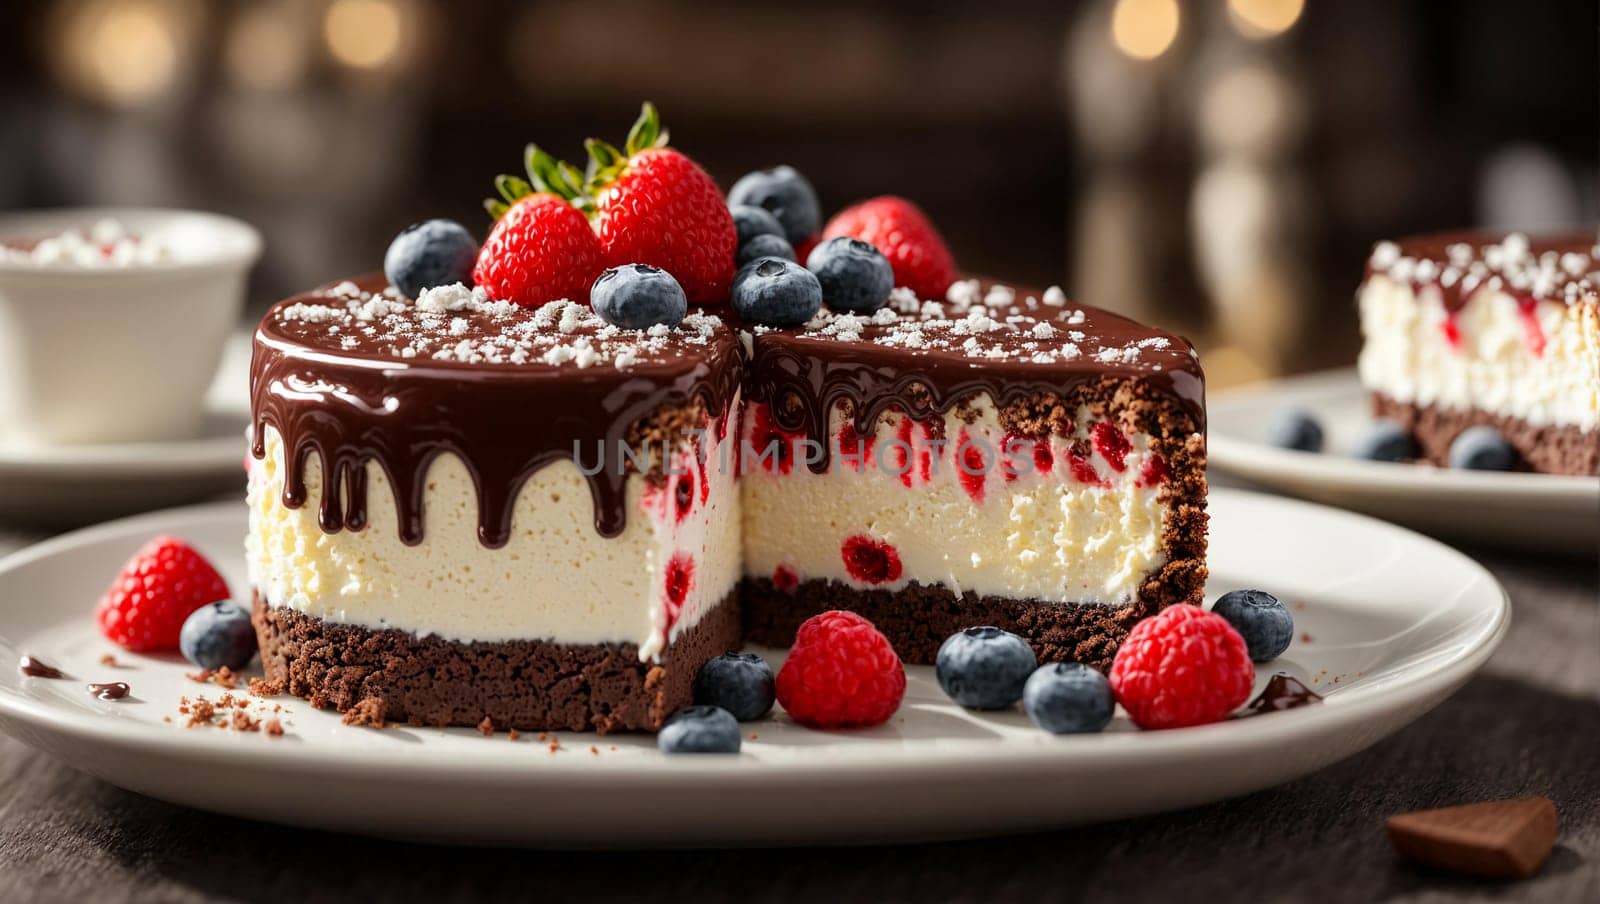 chocolate cheesecakes with cream sauce and berry filling by Севостьянов